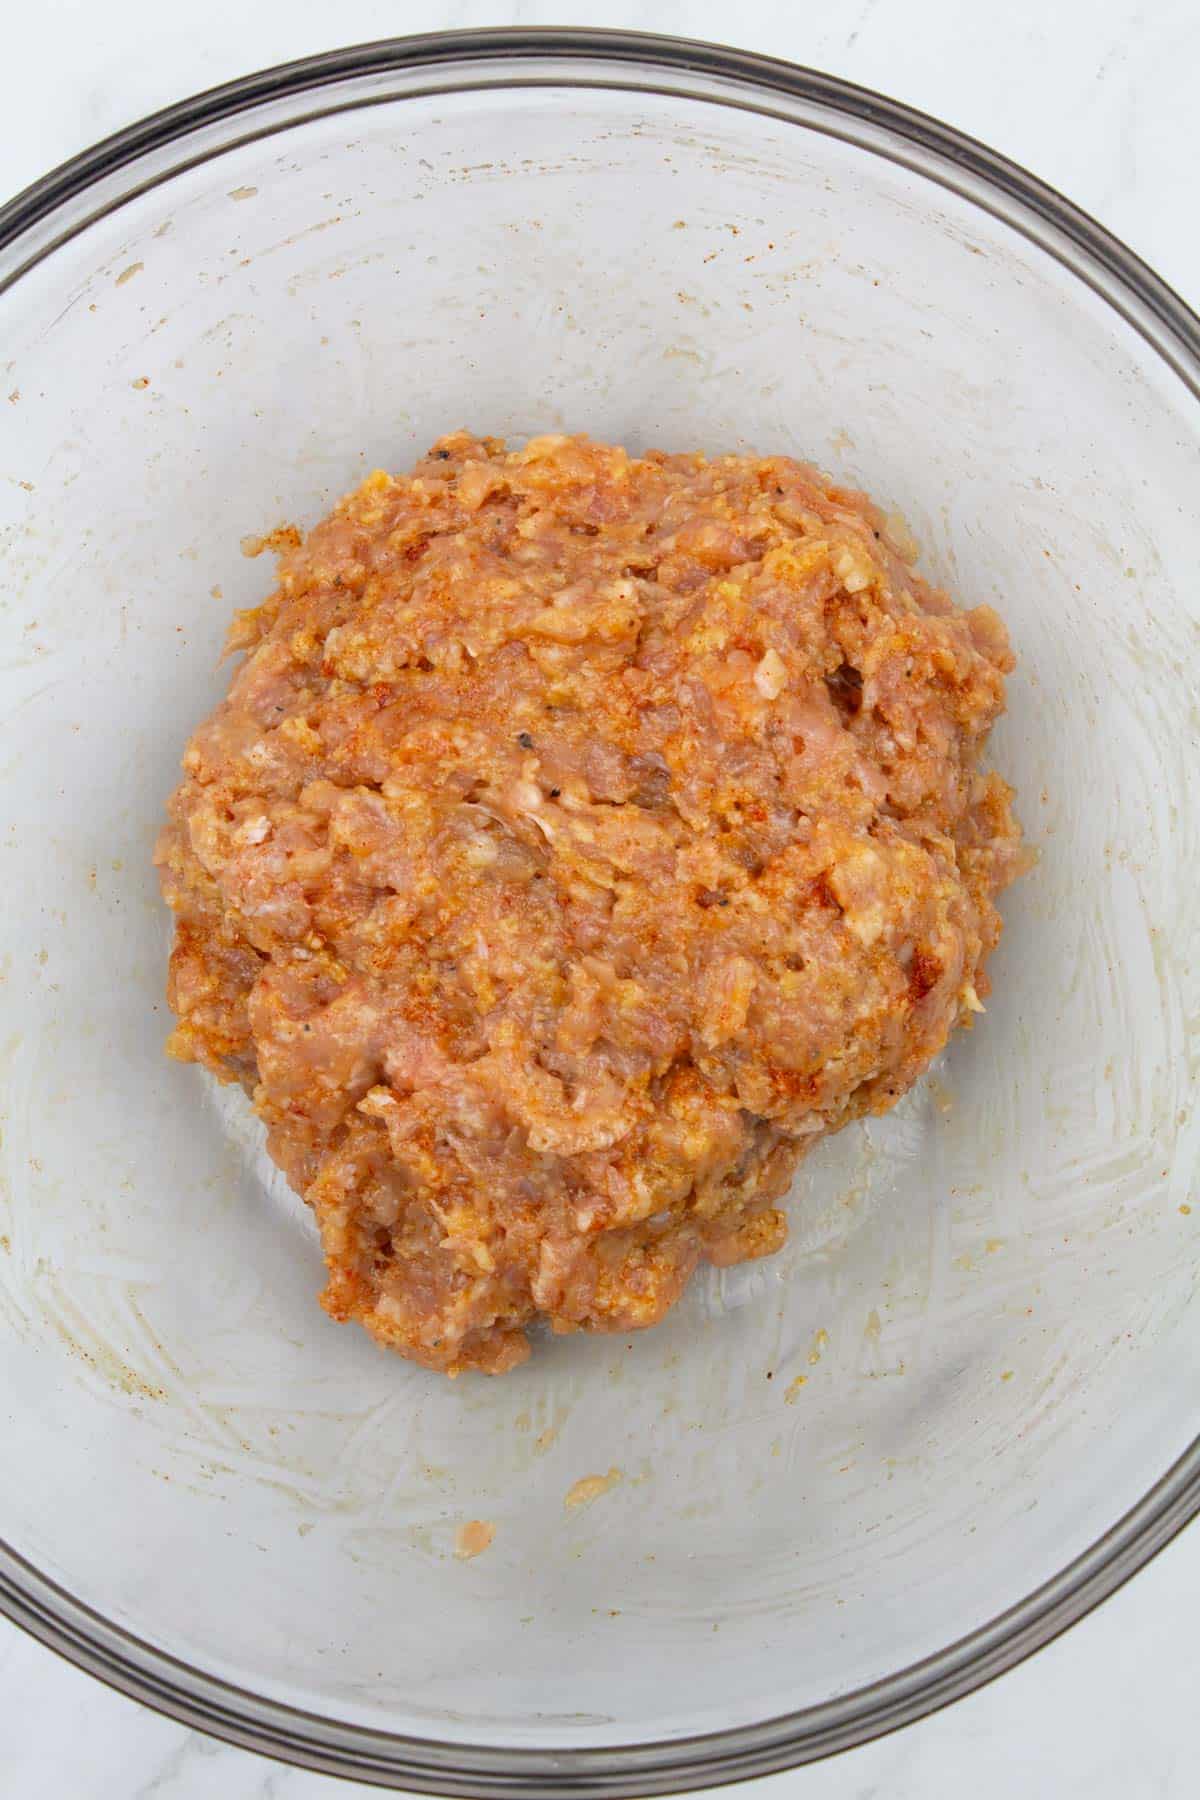 Ground chicken and other meatball ingredients mixed together in a bowl.